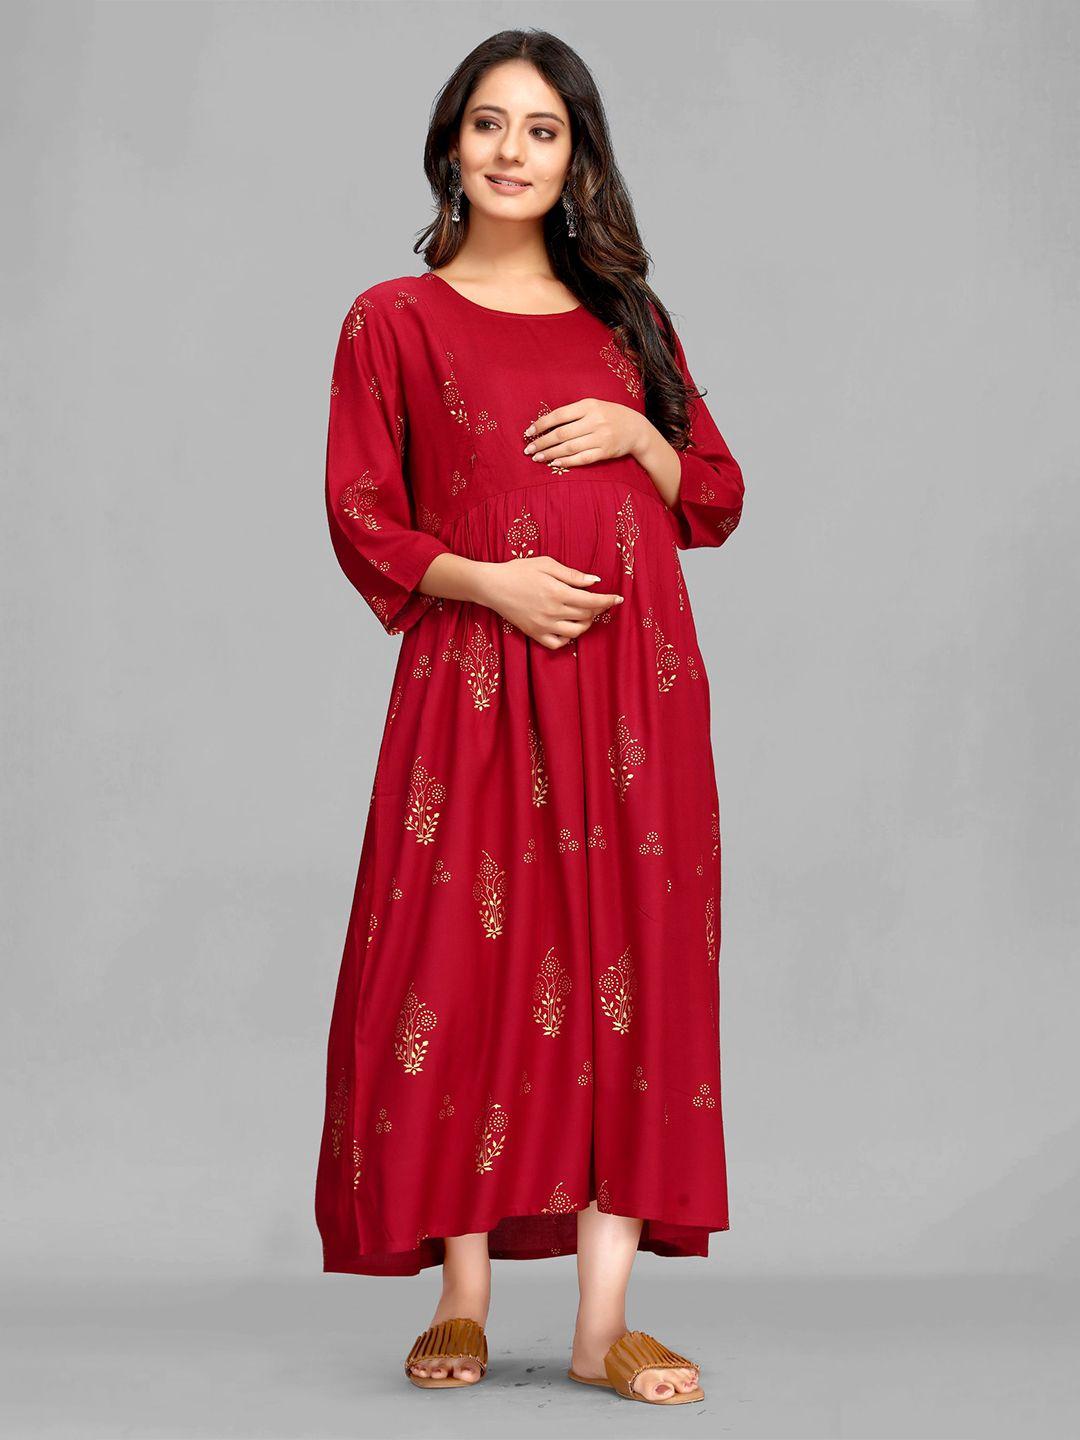 maiyee-floral-printed-round-neck-maternity-cotton-fit-&-flare-maxi-ethnic-dress